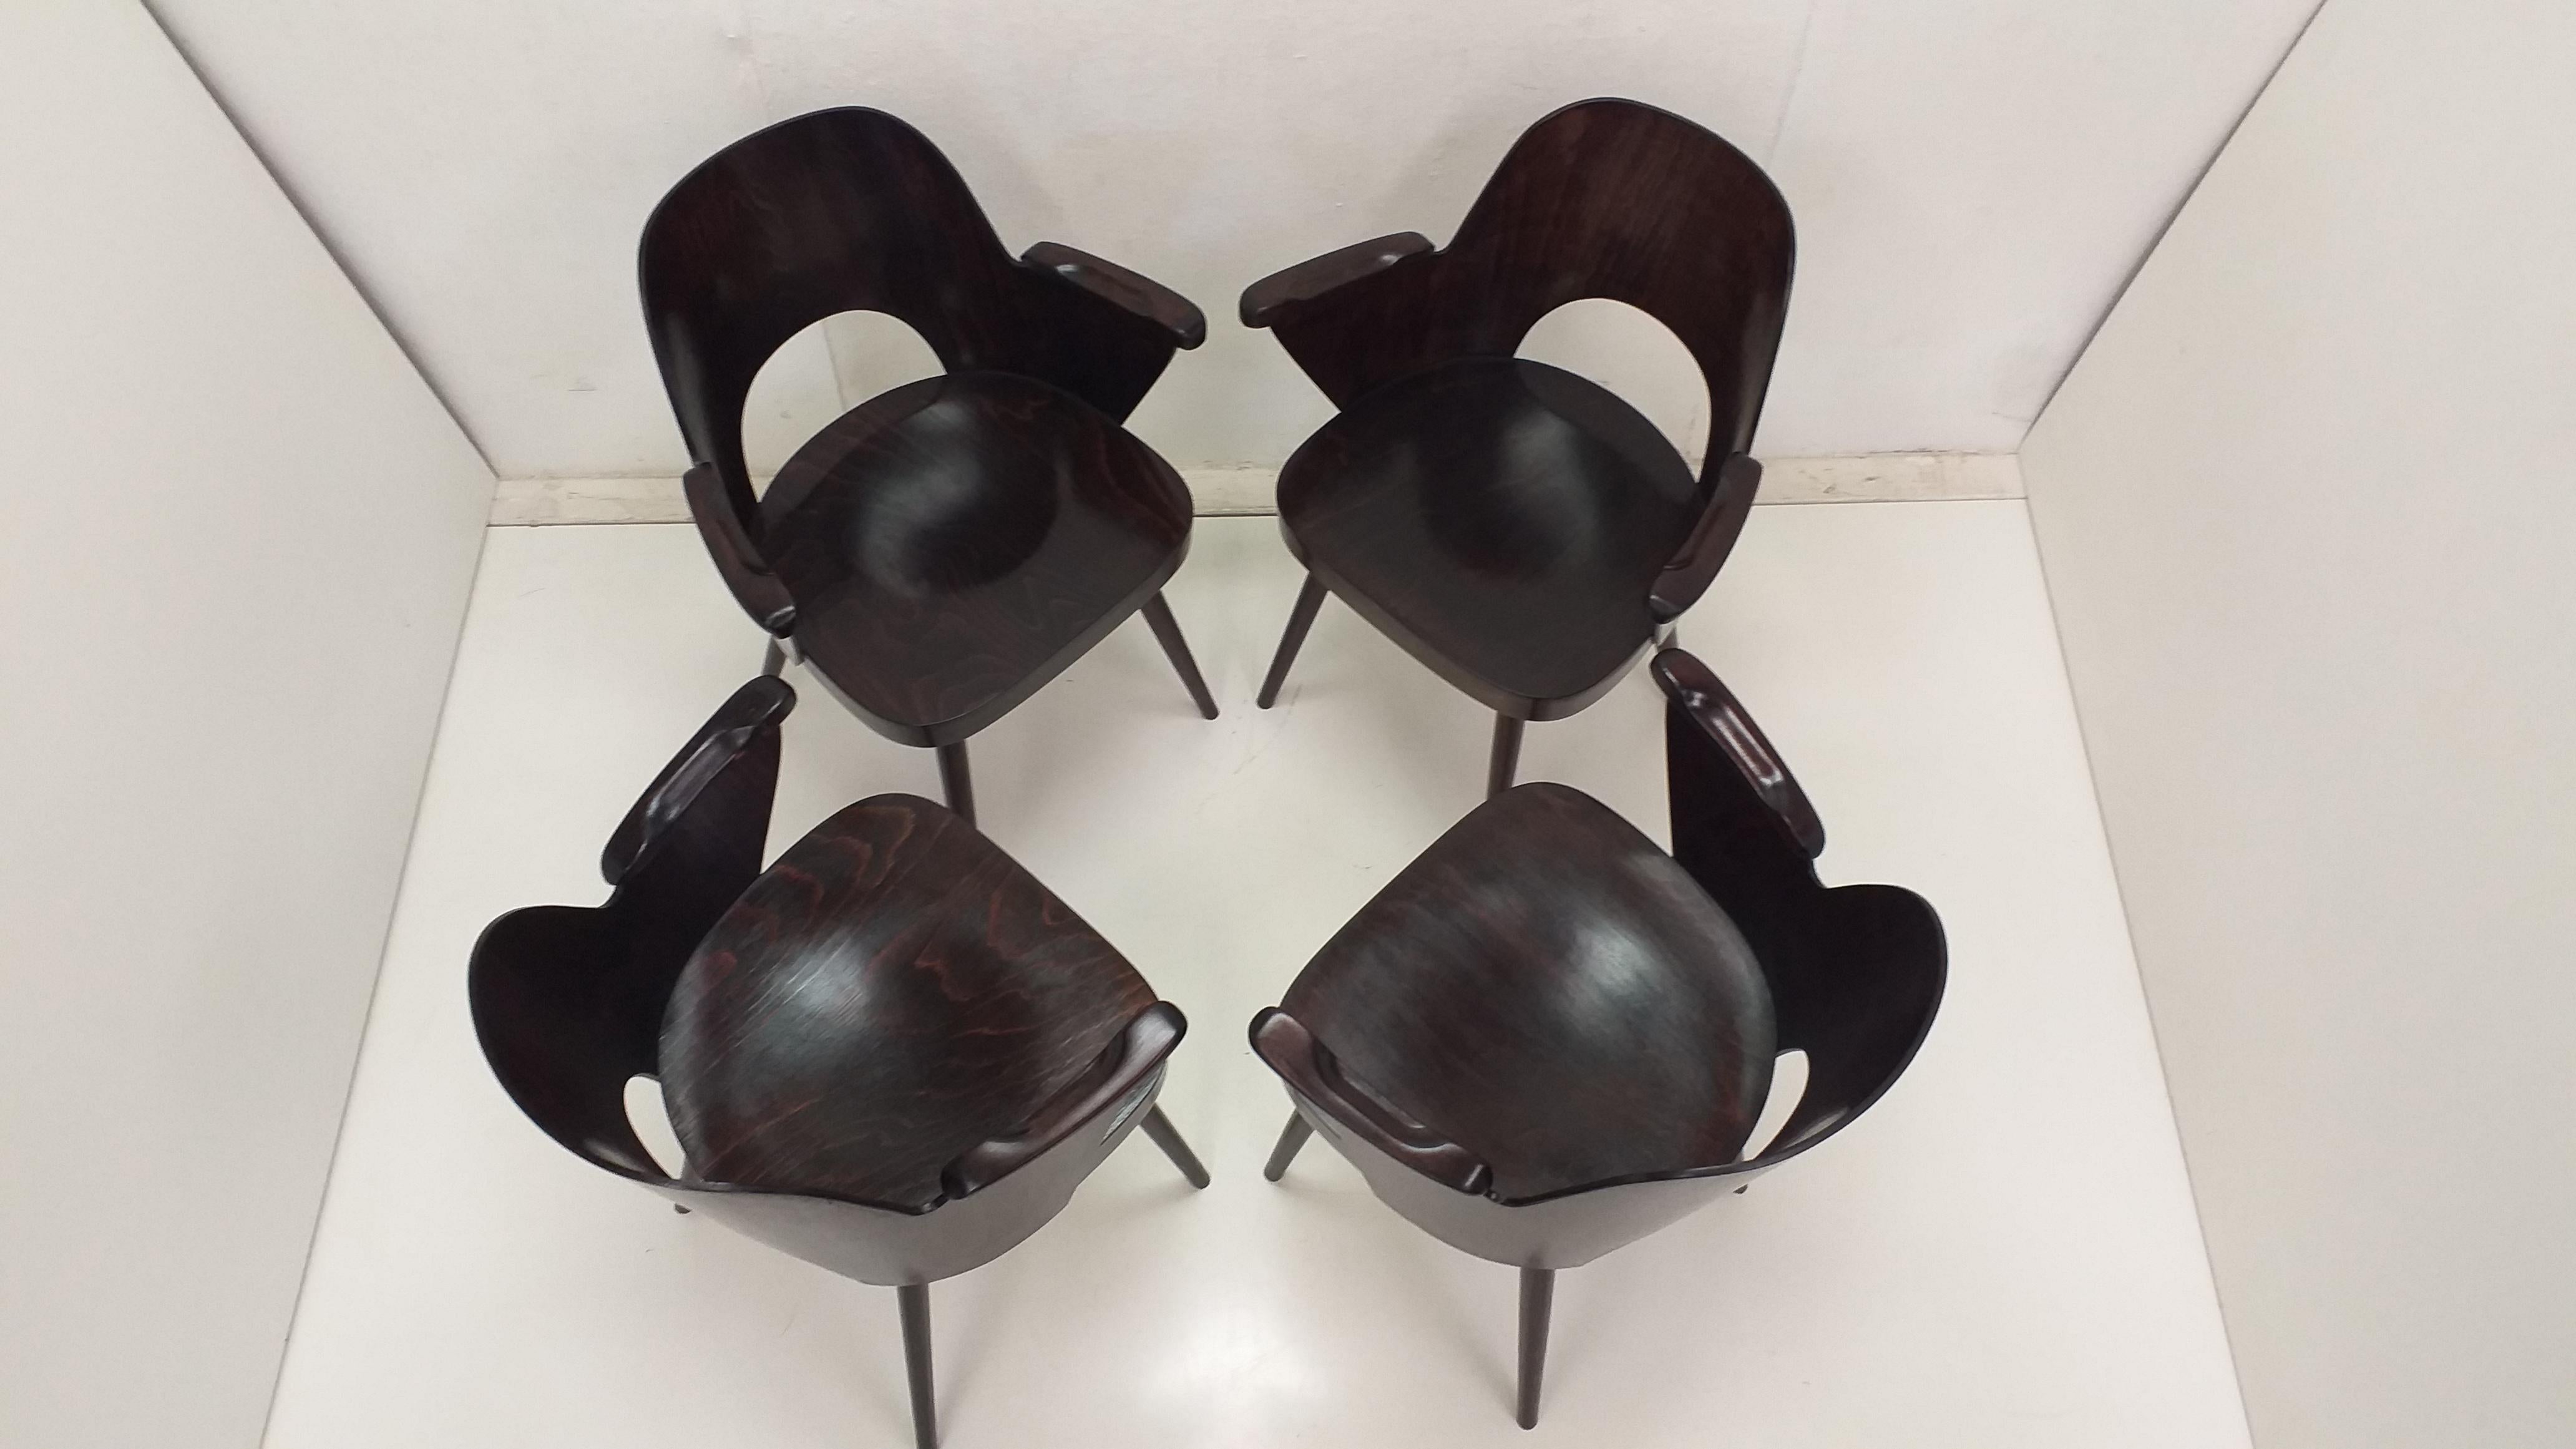 -	4 pieces of wooden chairs with armrests after a complete renovation
-	new shellac polish
-	Design by Oswald Haerdtl 1950
-	production Ton Bystřice pod Hostýnem Czechoslovakia
